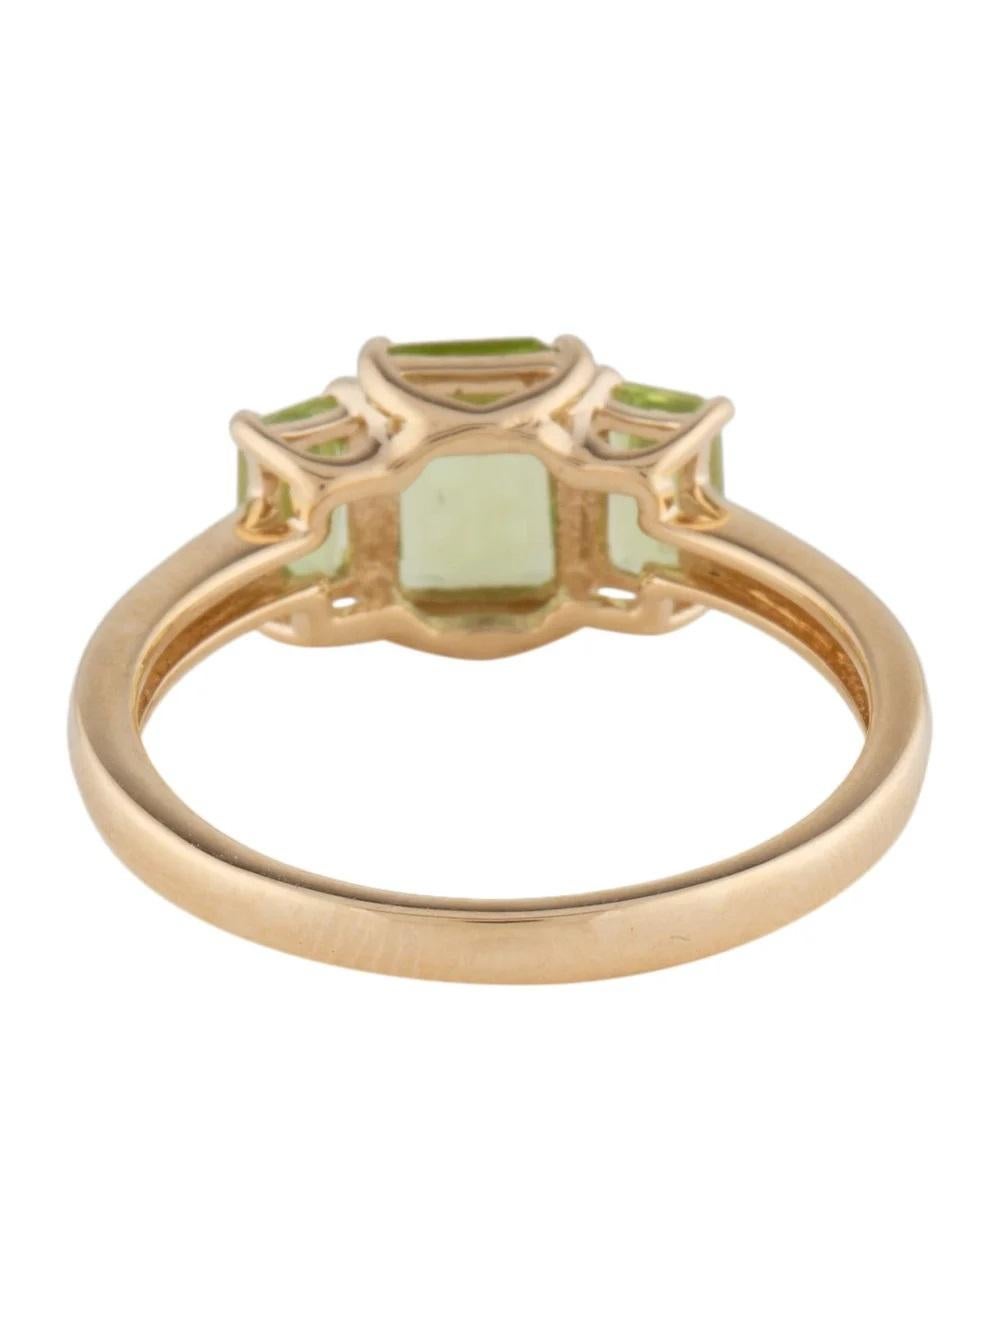 14K Peridot Cocktail Ring 1.37ctw Green Gemstone Yellow Gold Size 6.75 - Luxury In New Condition For Sale In Holtsville, NY